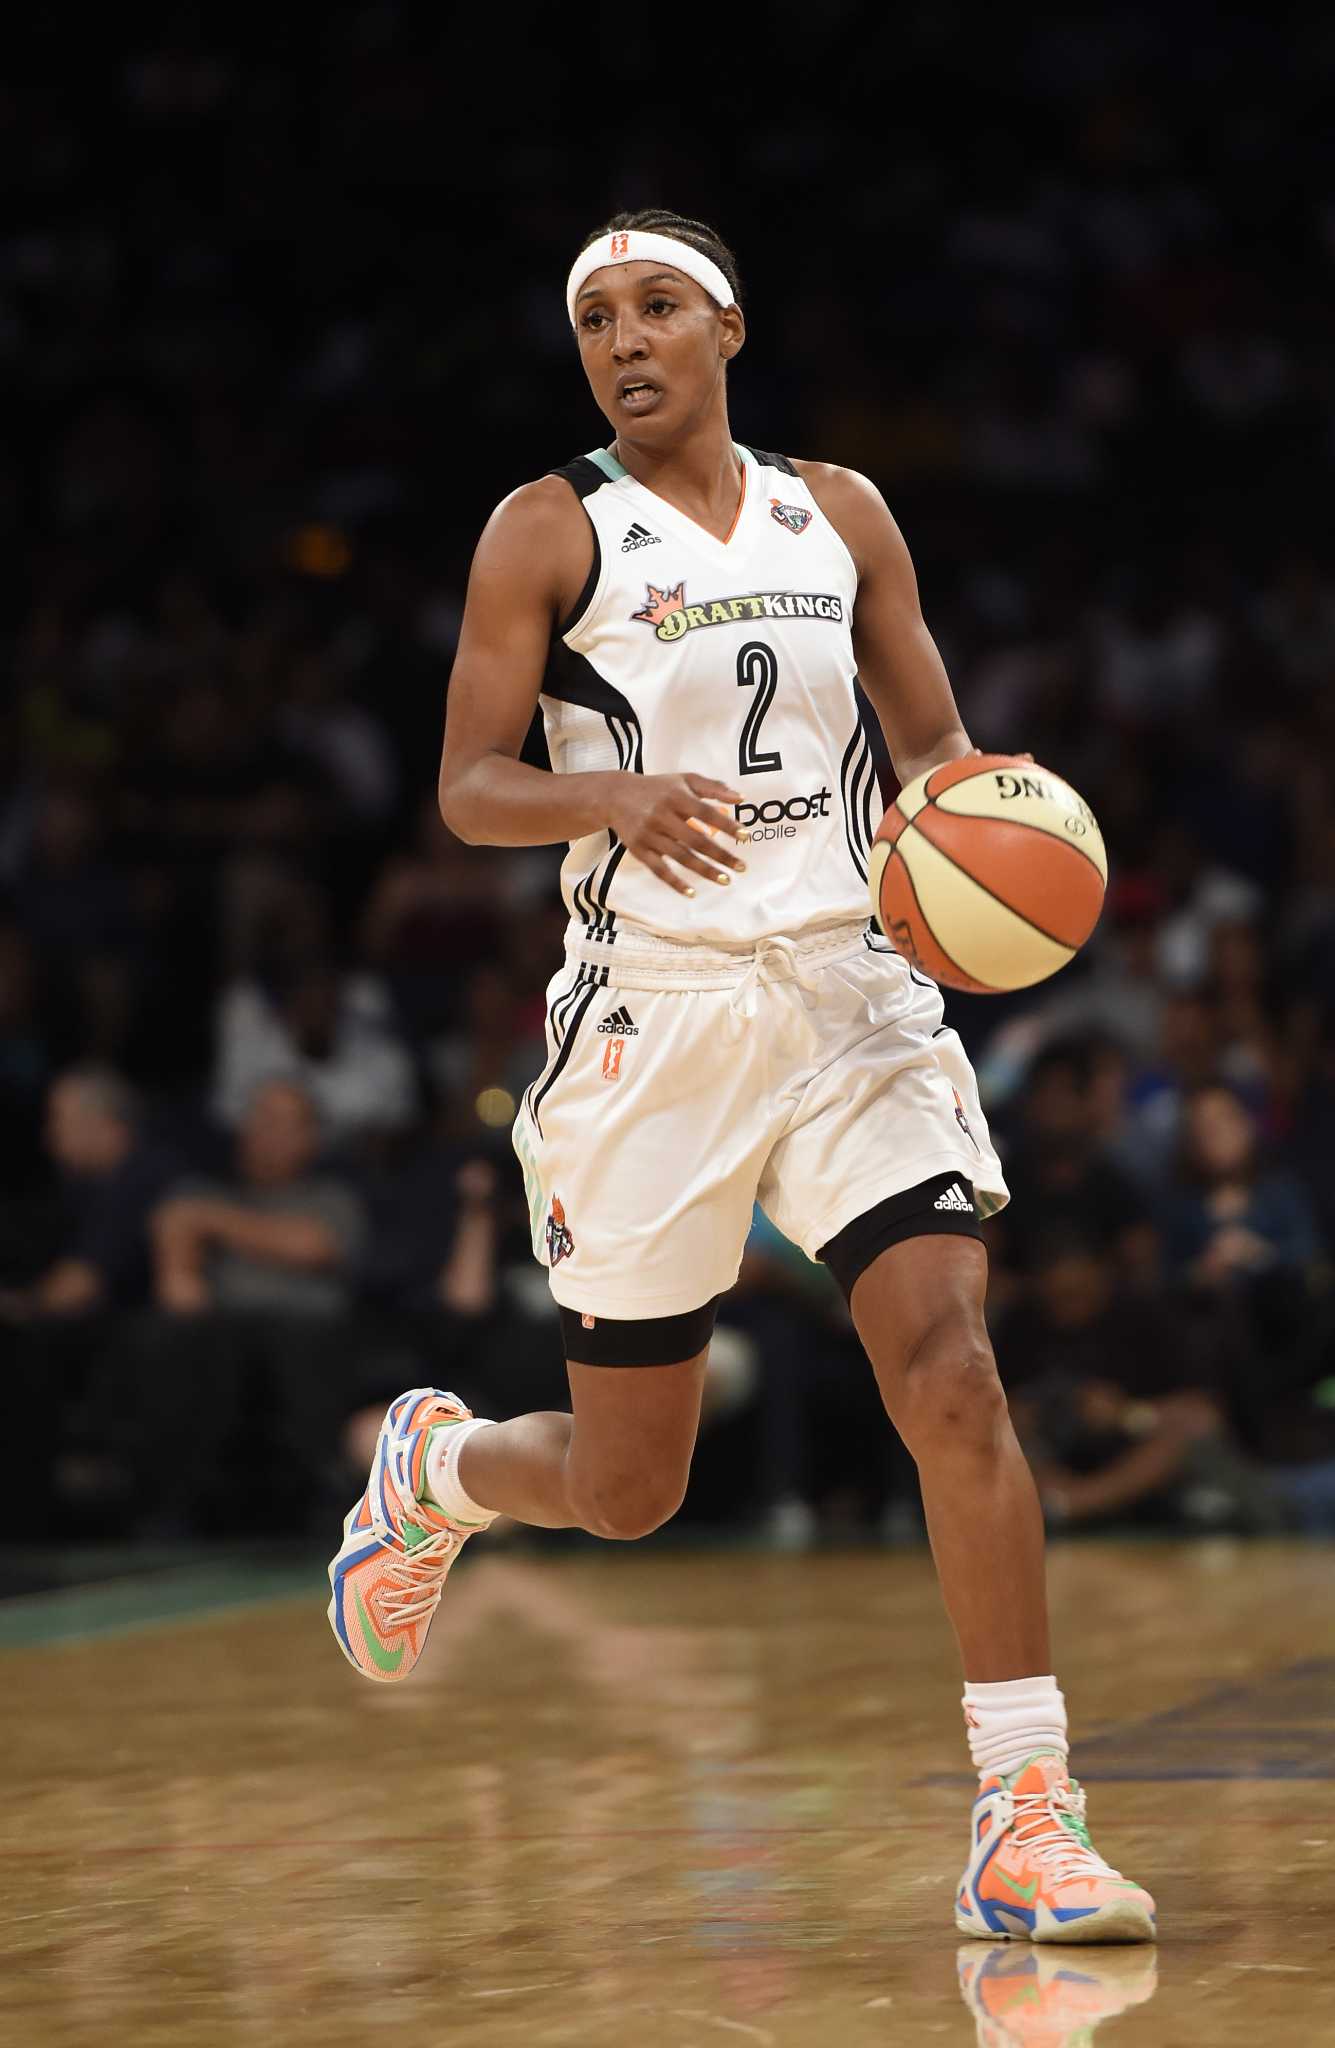 WNBA players see a different league than one described by Candice